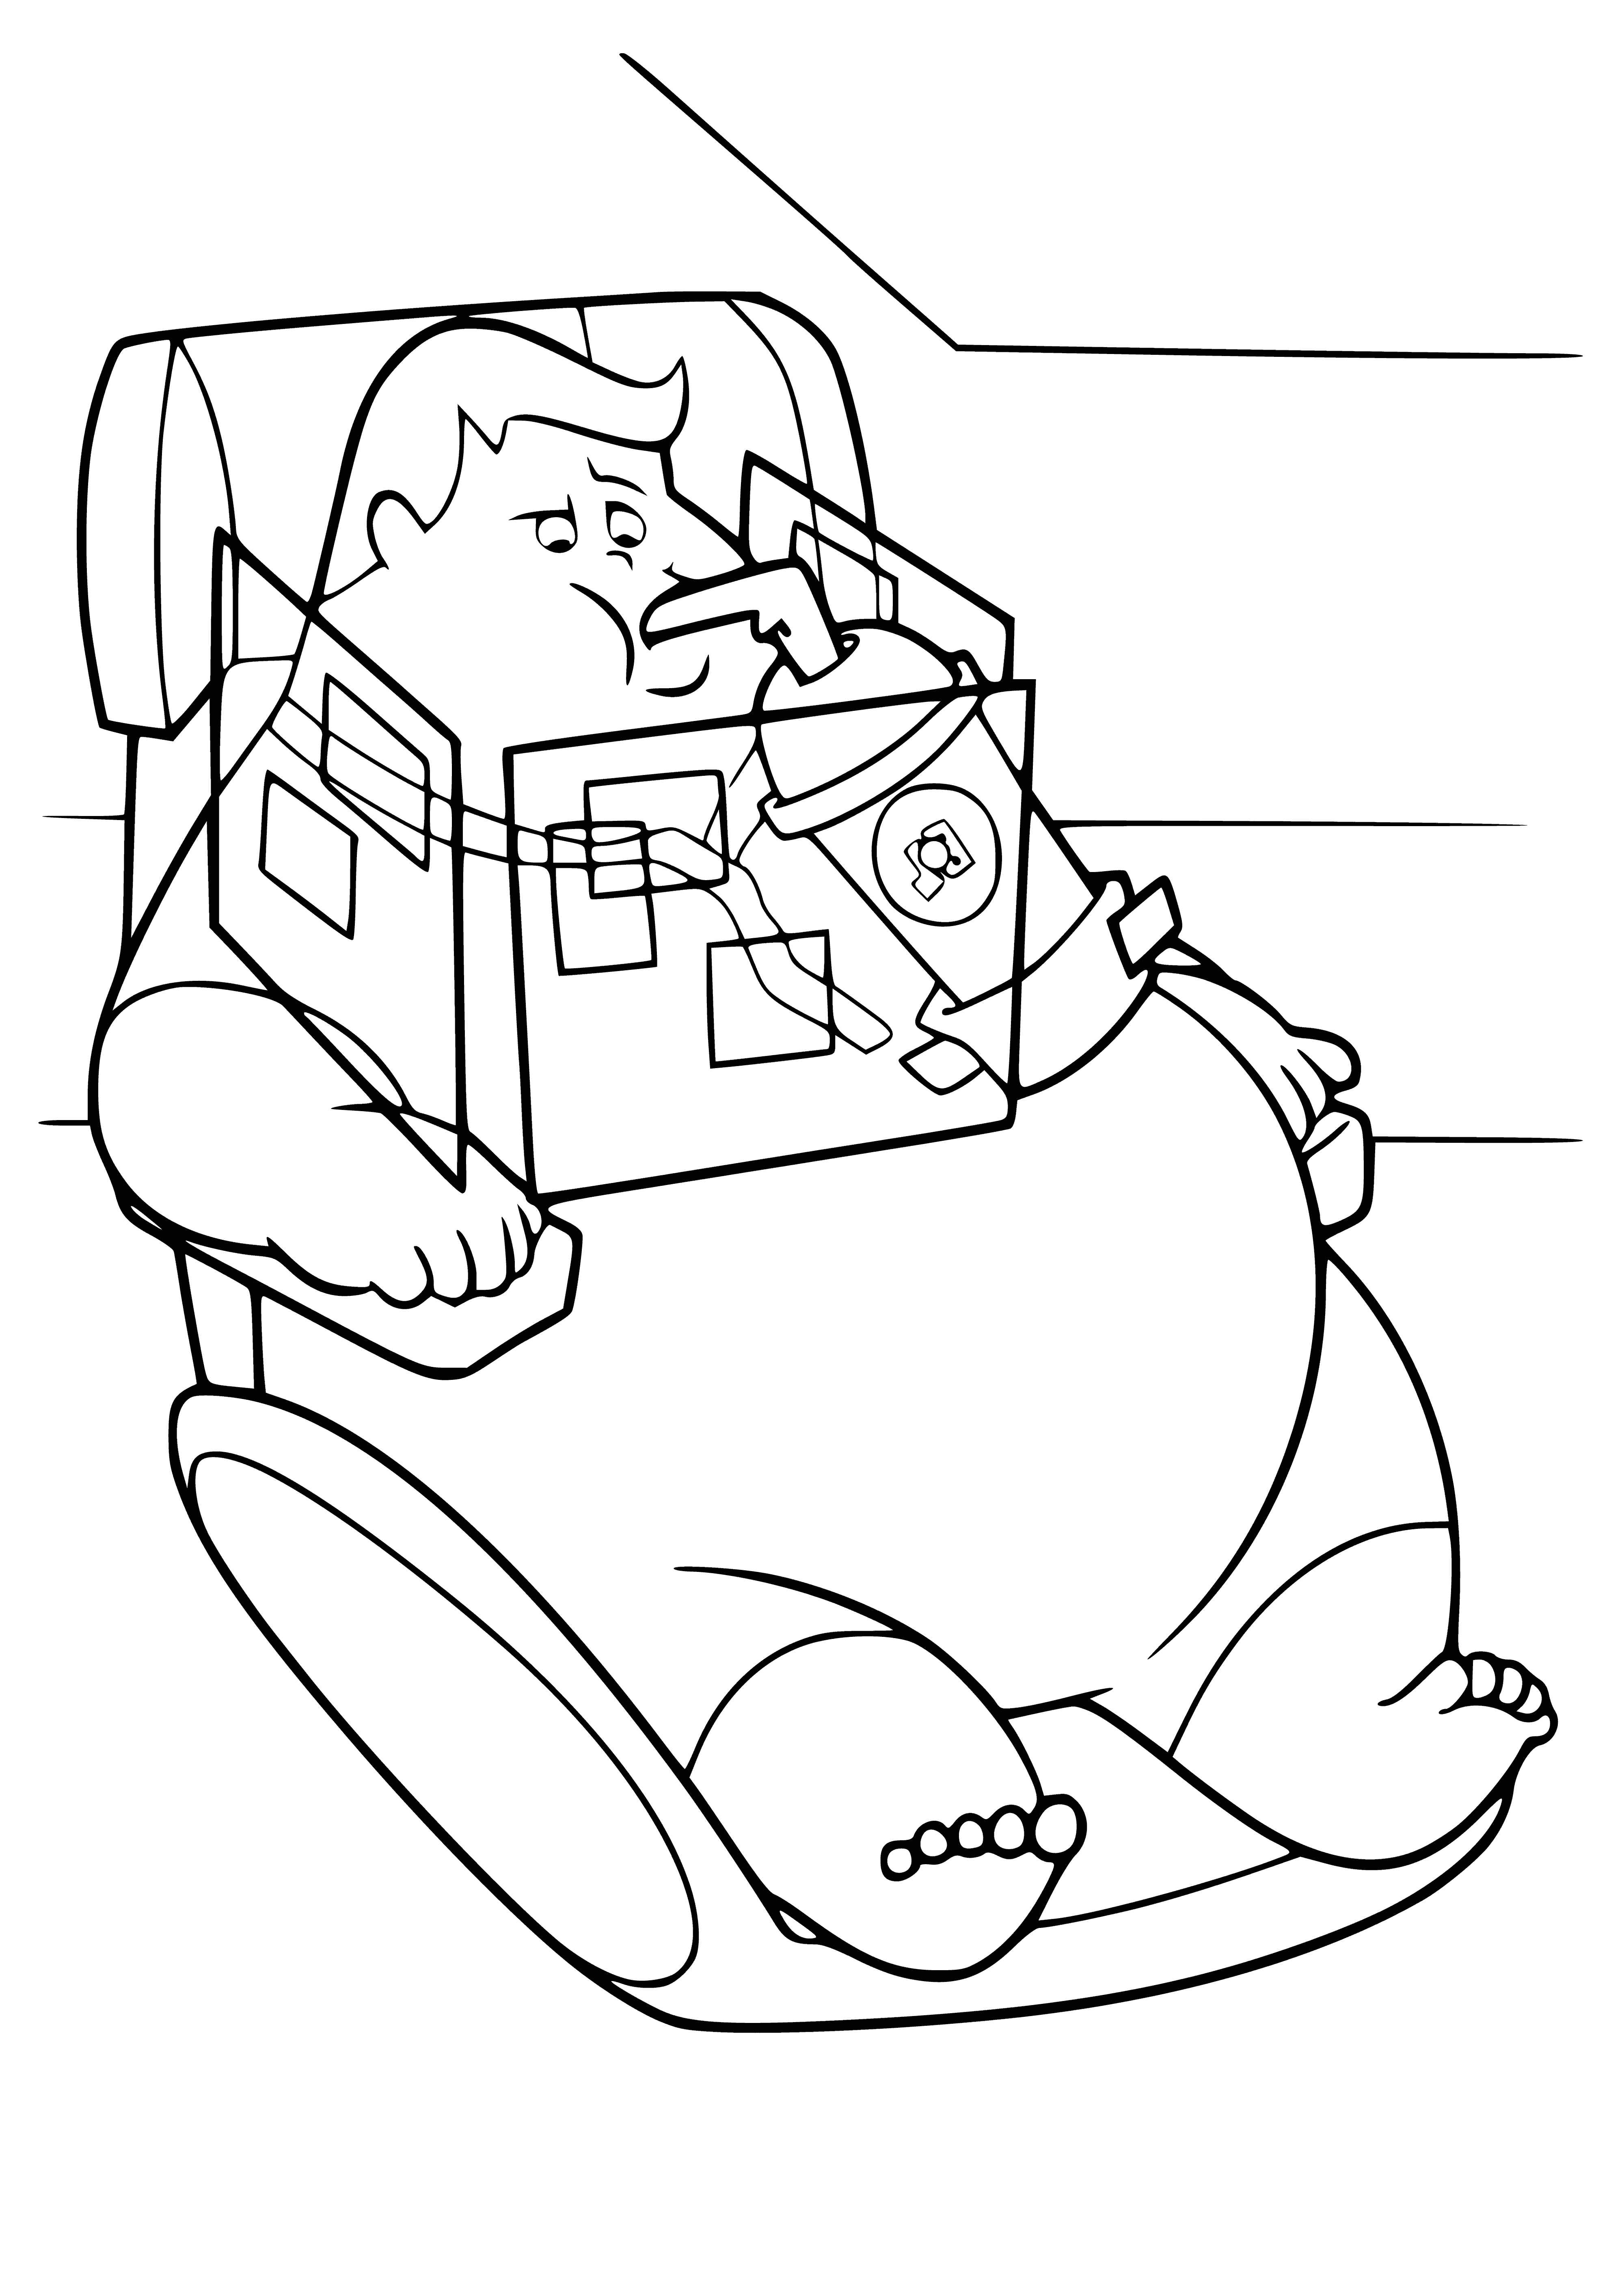 coloring page: Wall-e, standing beside a man about to fall, looks concerned.